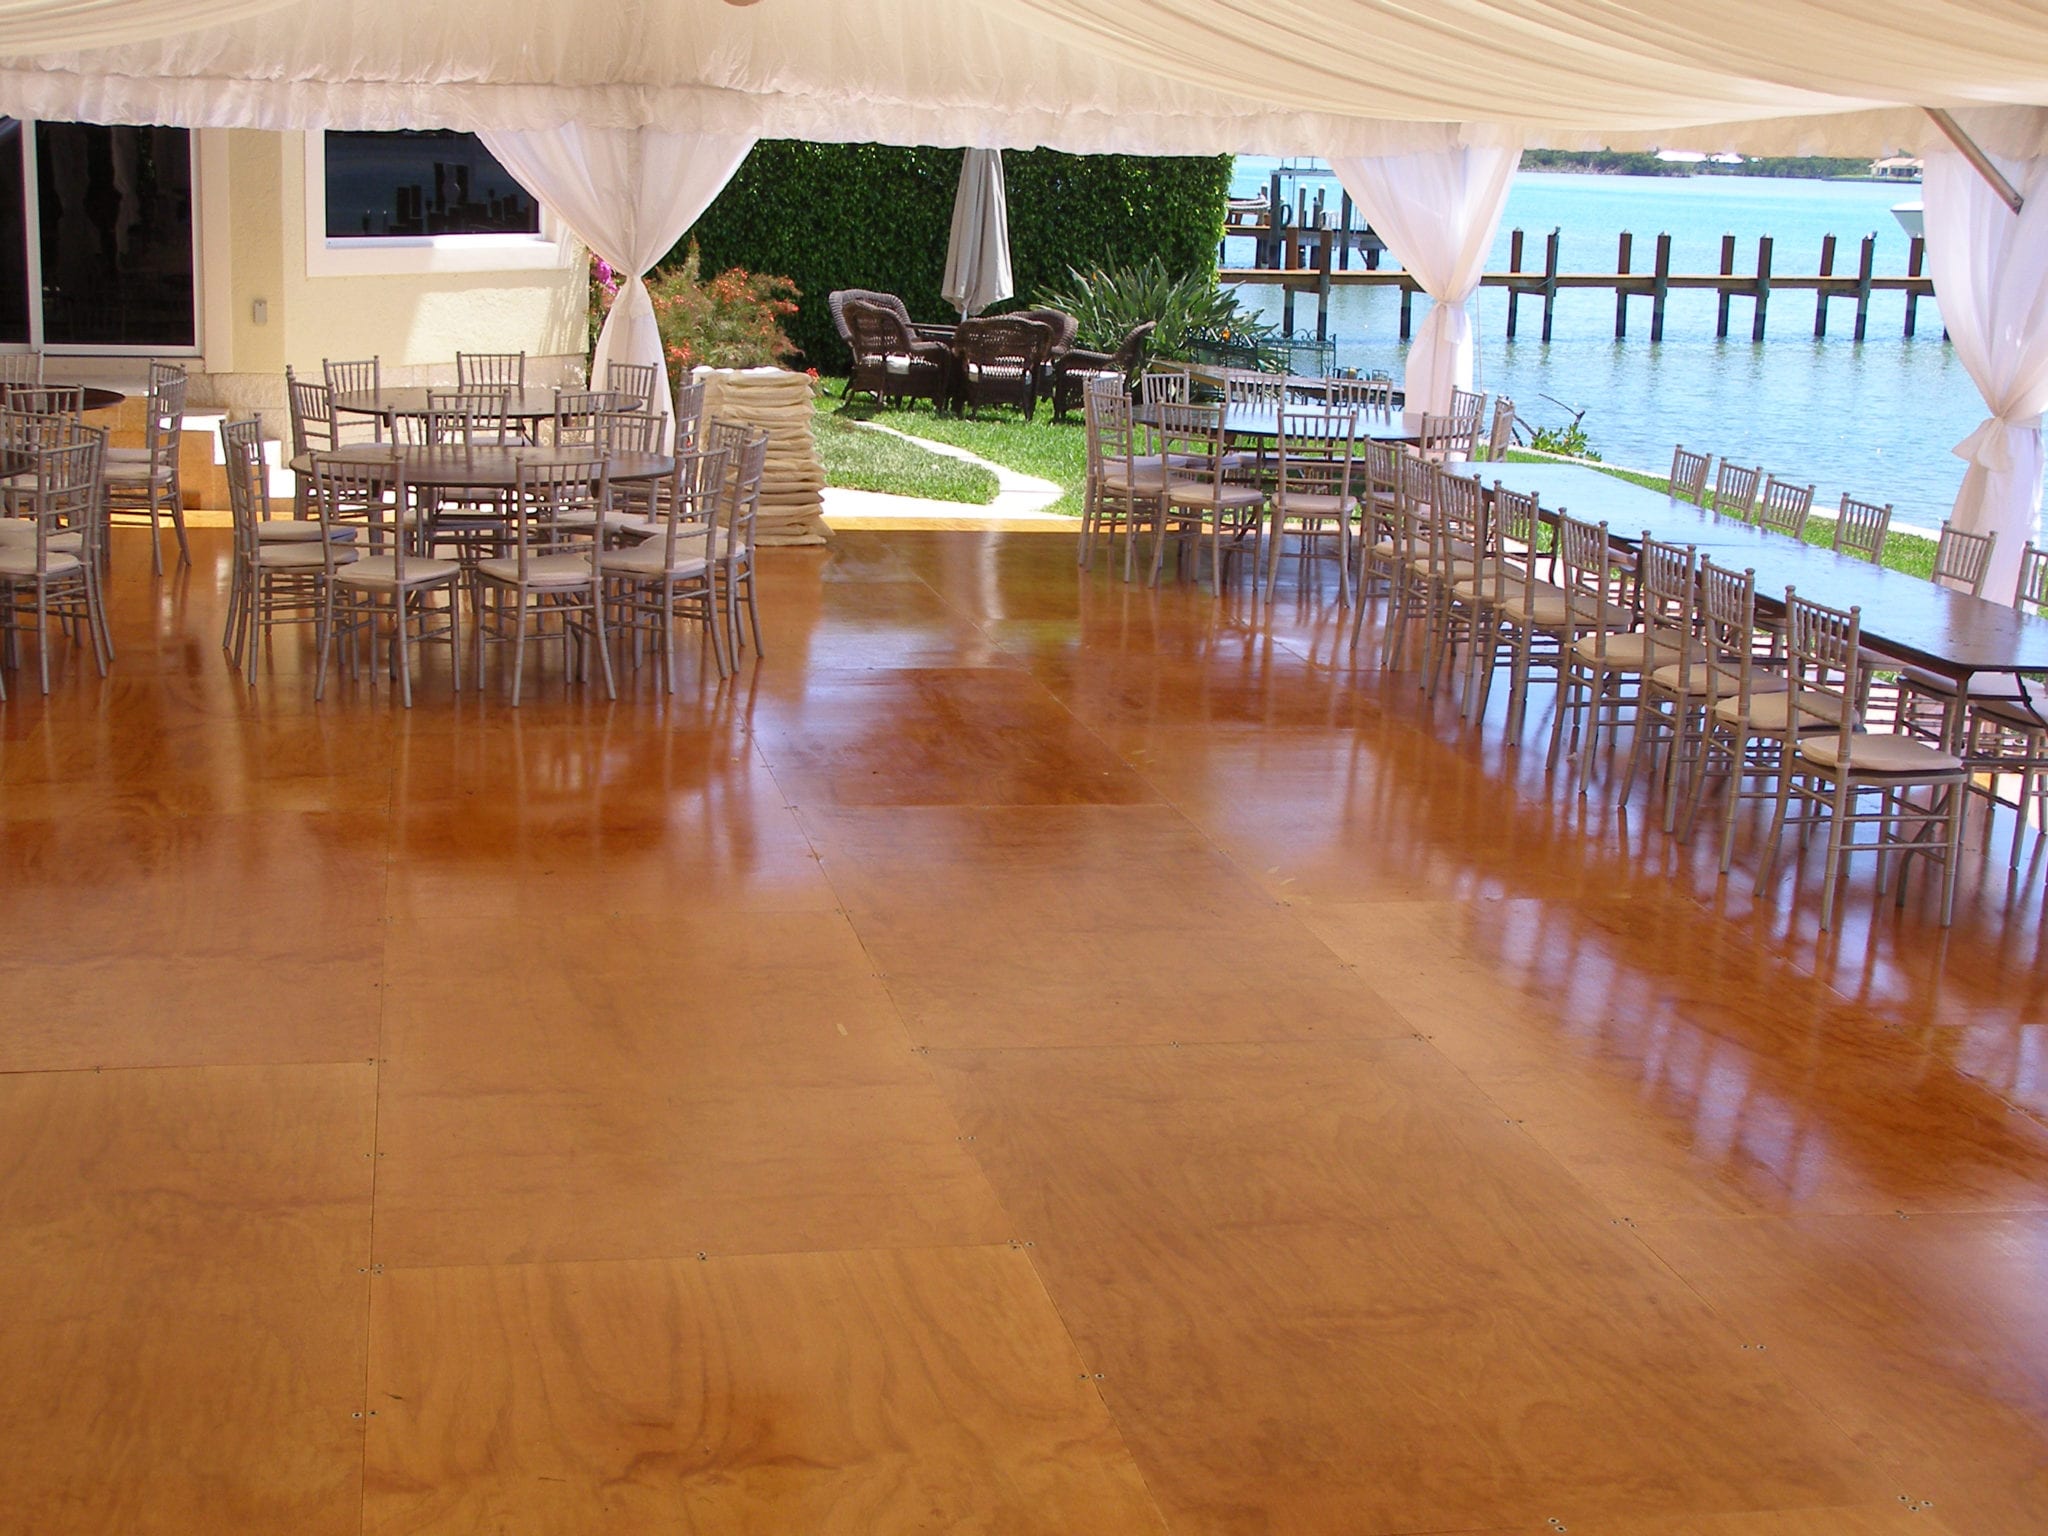 Custom built stained and varnished wood floor in a 30' x 70' frame tent.